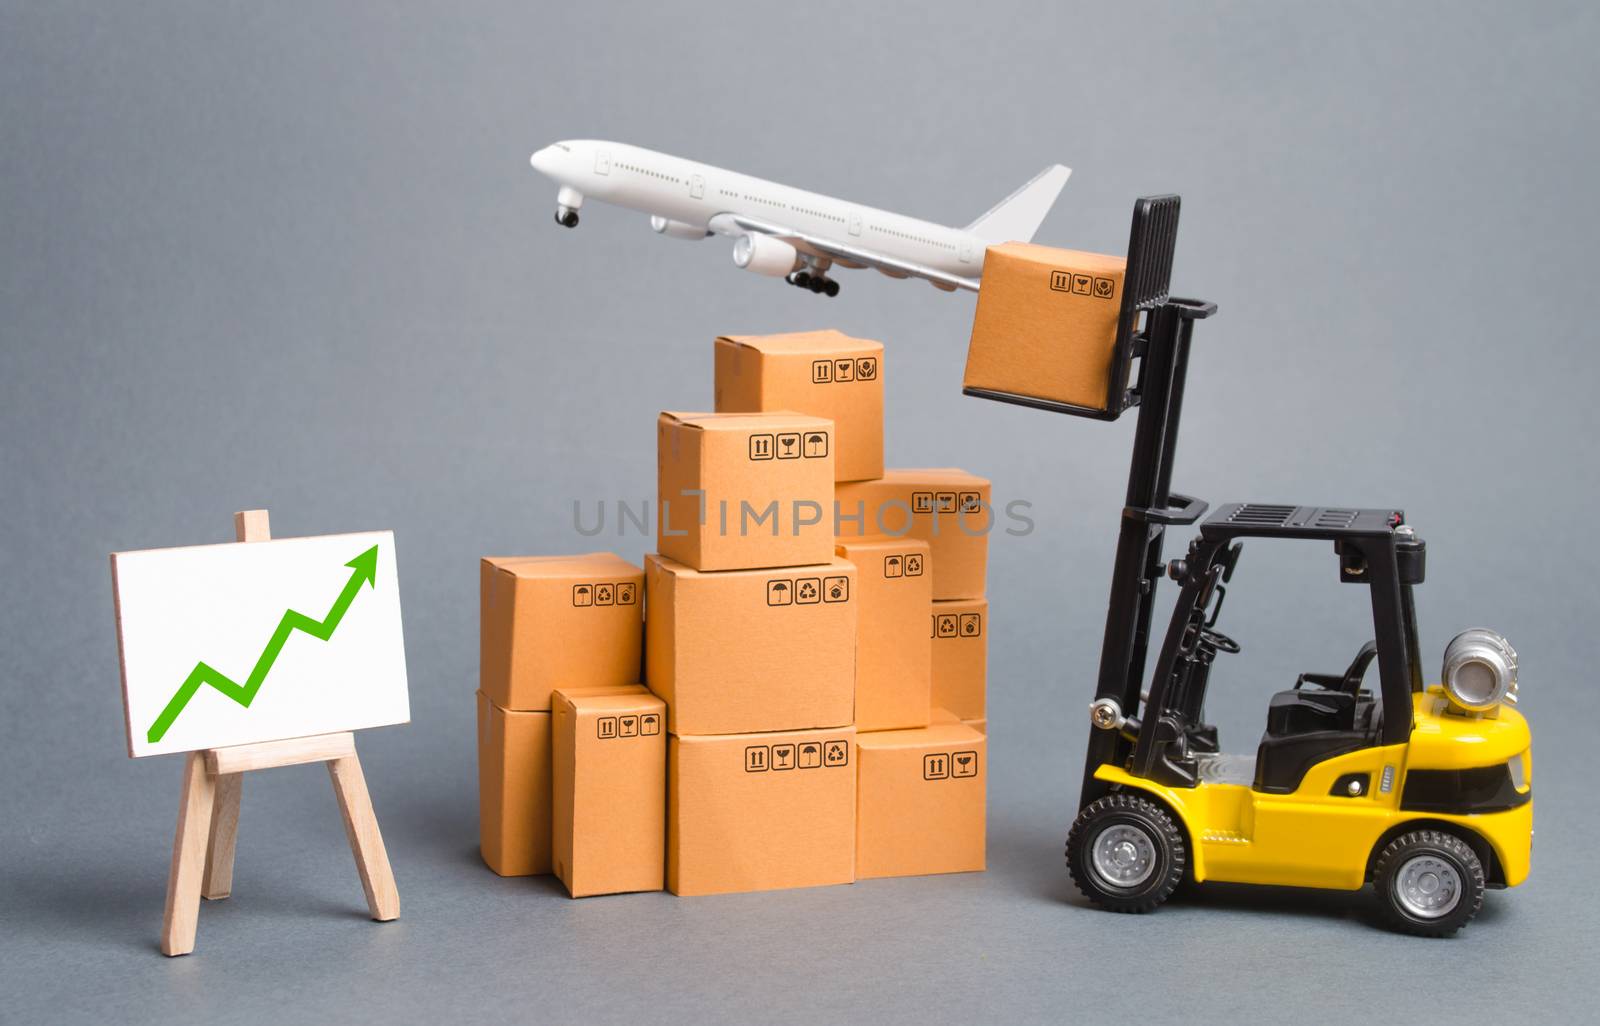 Cargo airplane, forklift truck with cardboard boxes and green arrow up. Increase freight transportation and delivery volumes of products goods. orders growth and throughput of transport infrastructure